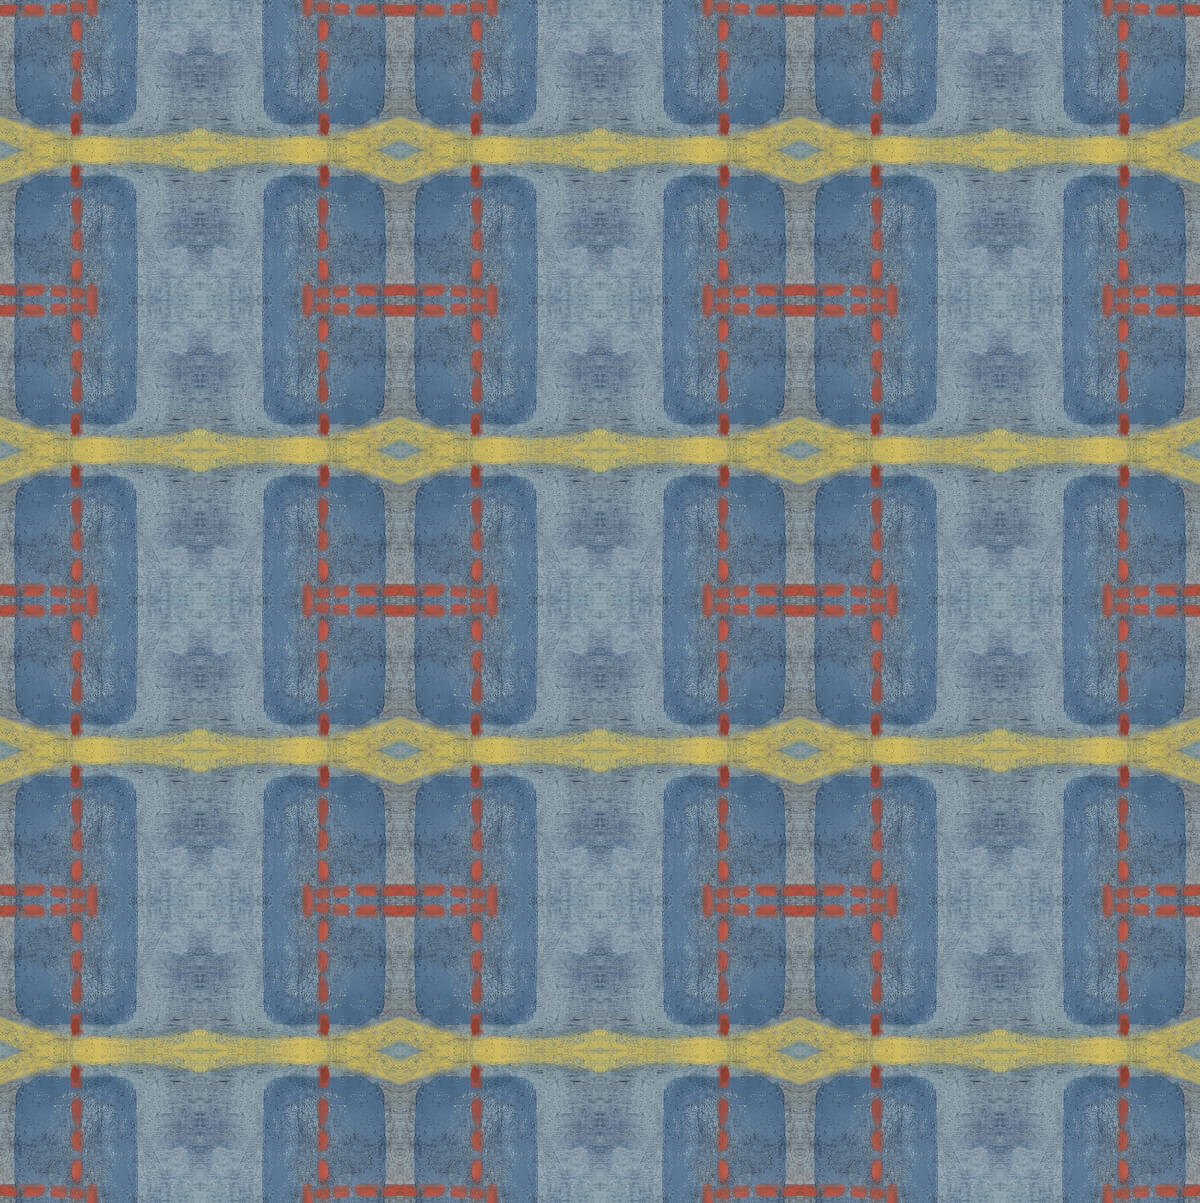 Narrative III pattern in blue, red, and yellow